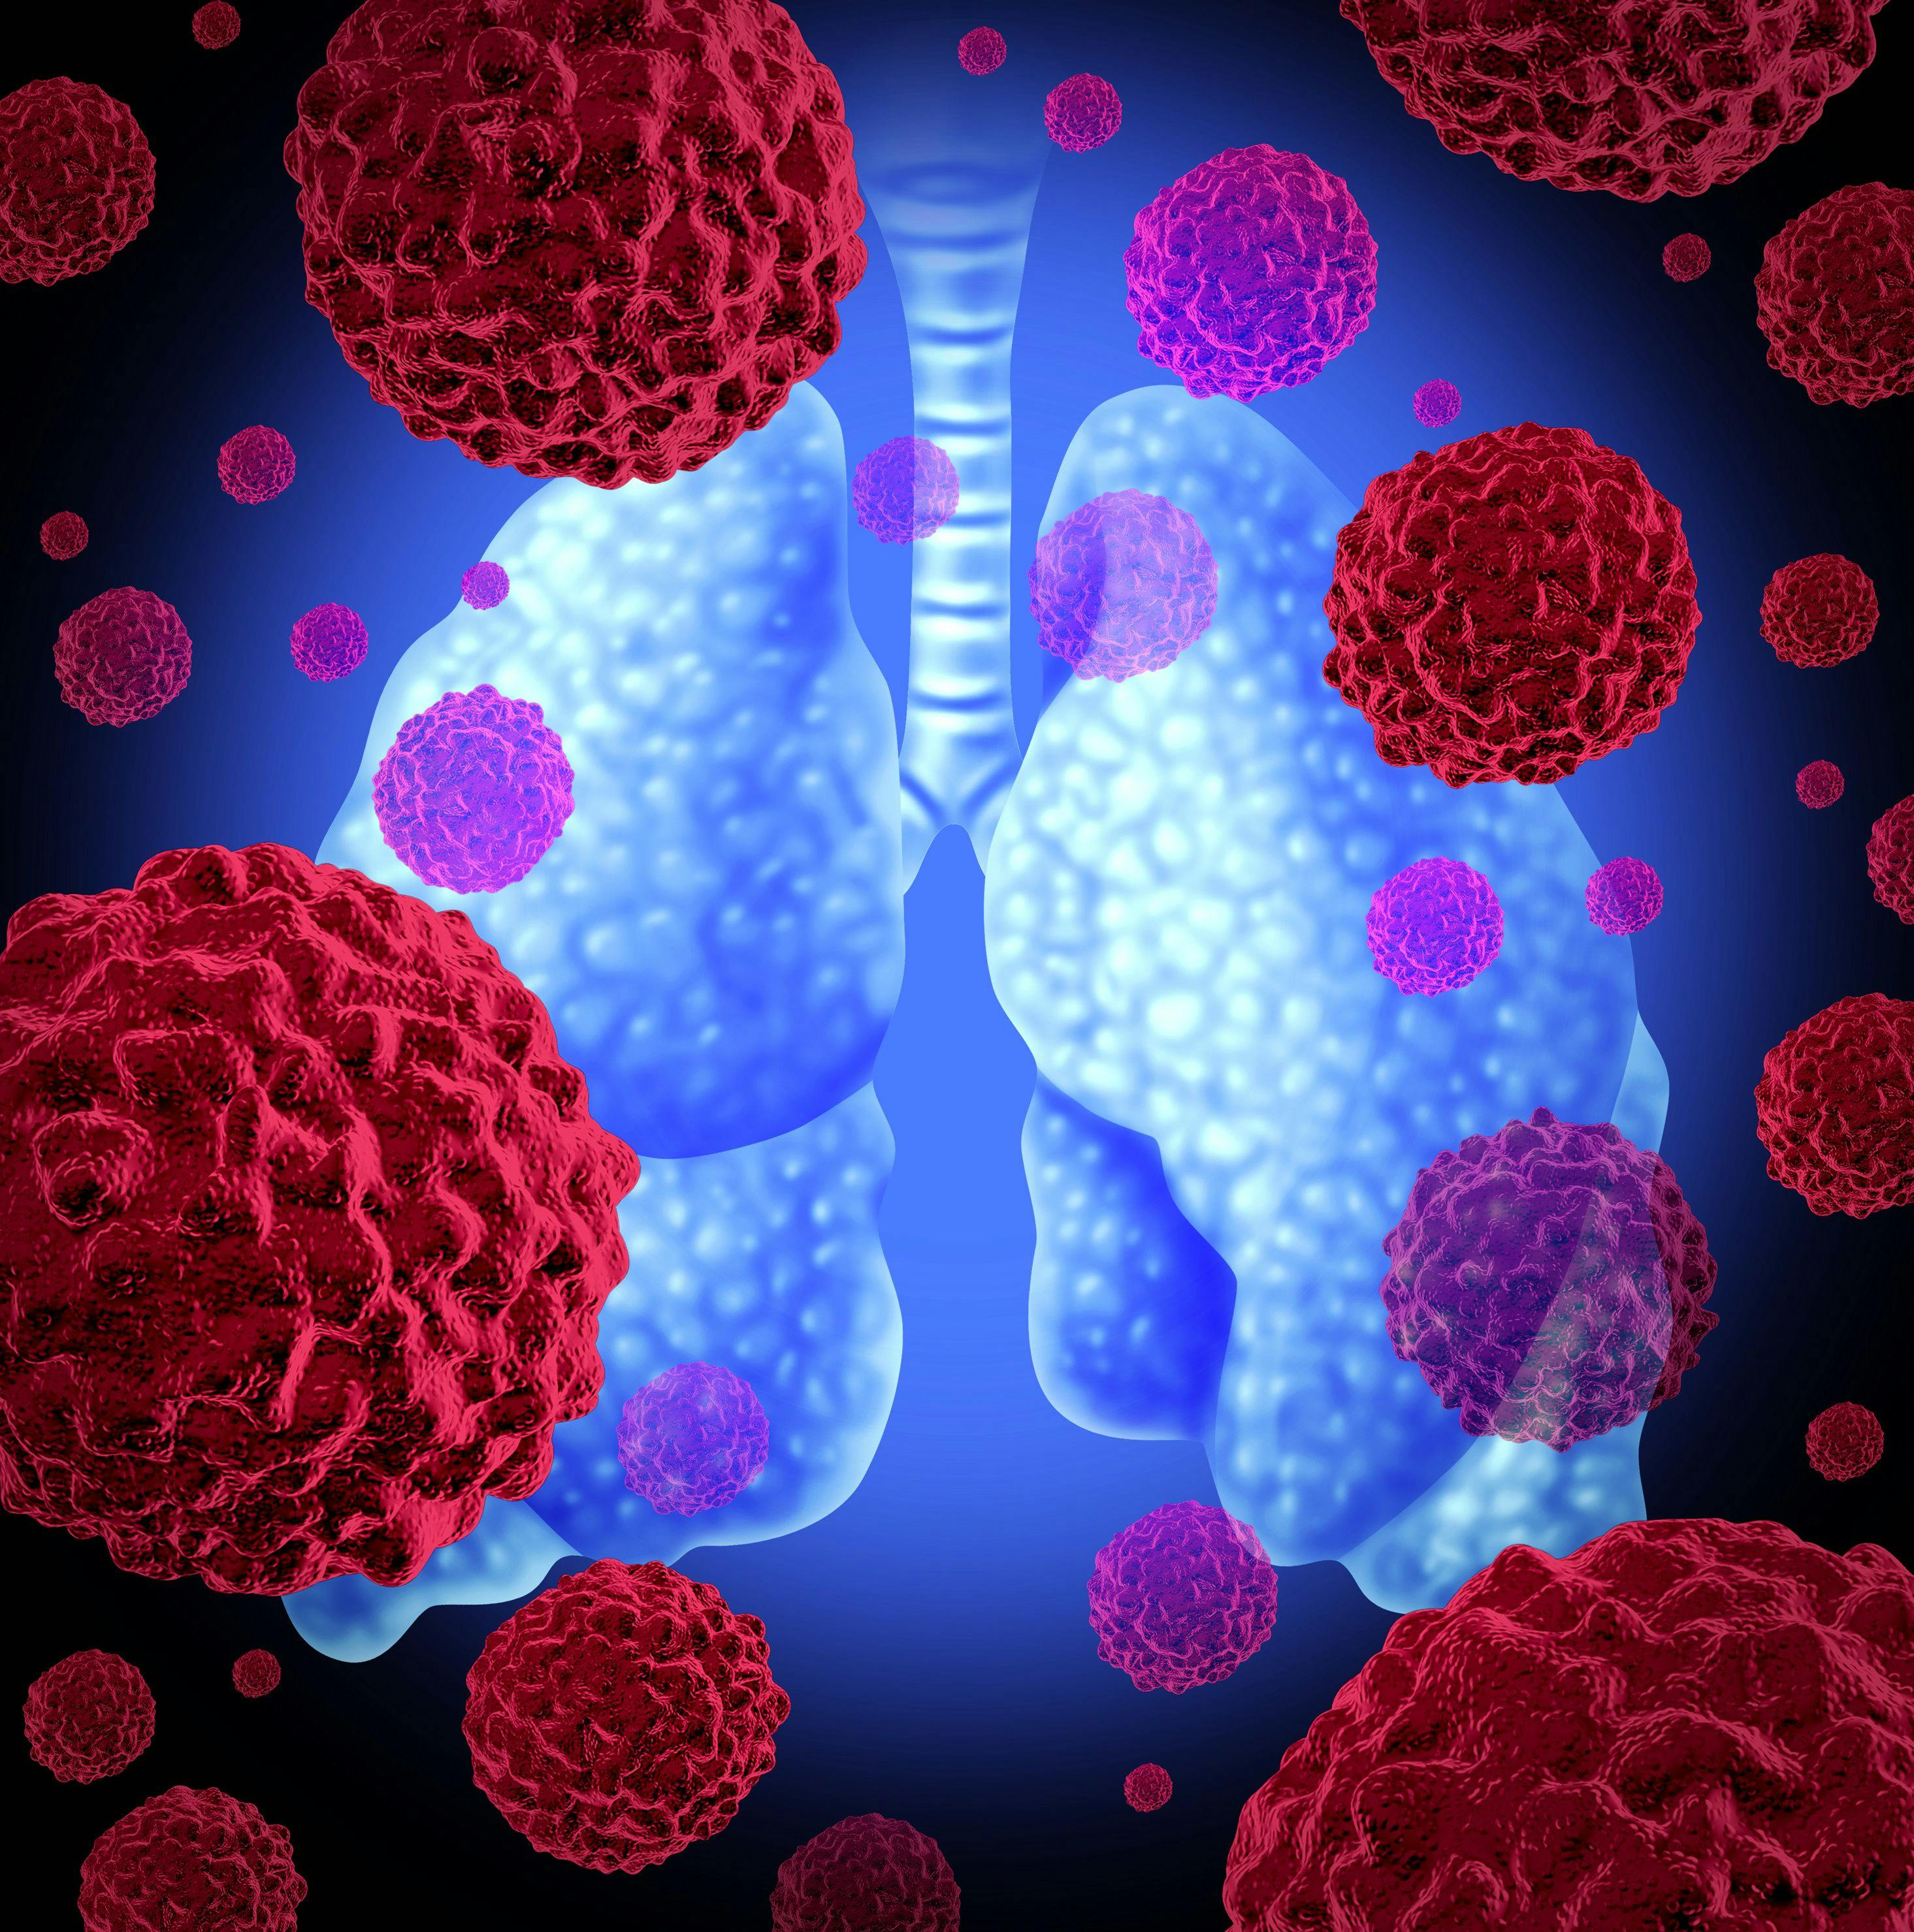 "Although the sample size was limited, this study preliminarily suggests that socazolimab combined with chemotherapy may have a survival benefit in the first-line treatment of ES-SCLC,” according to the study authors. 